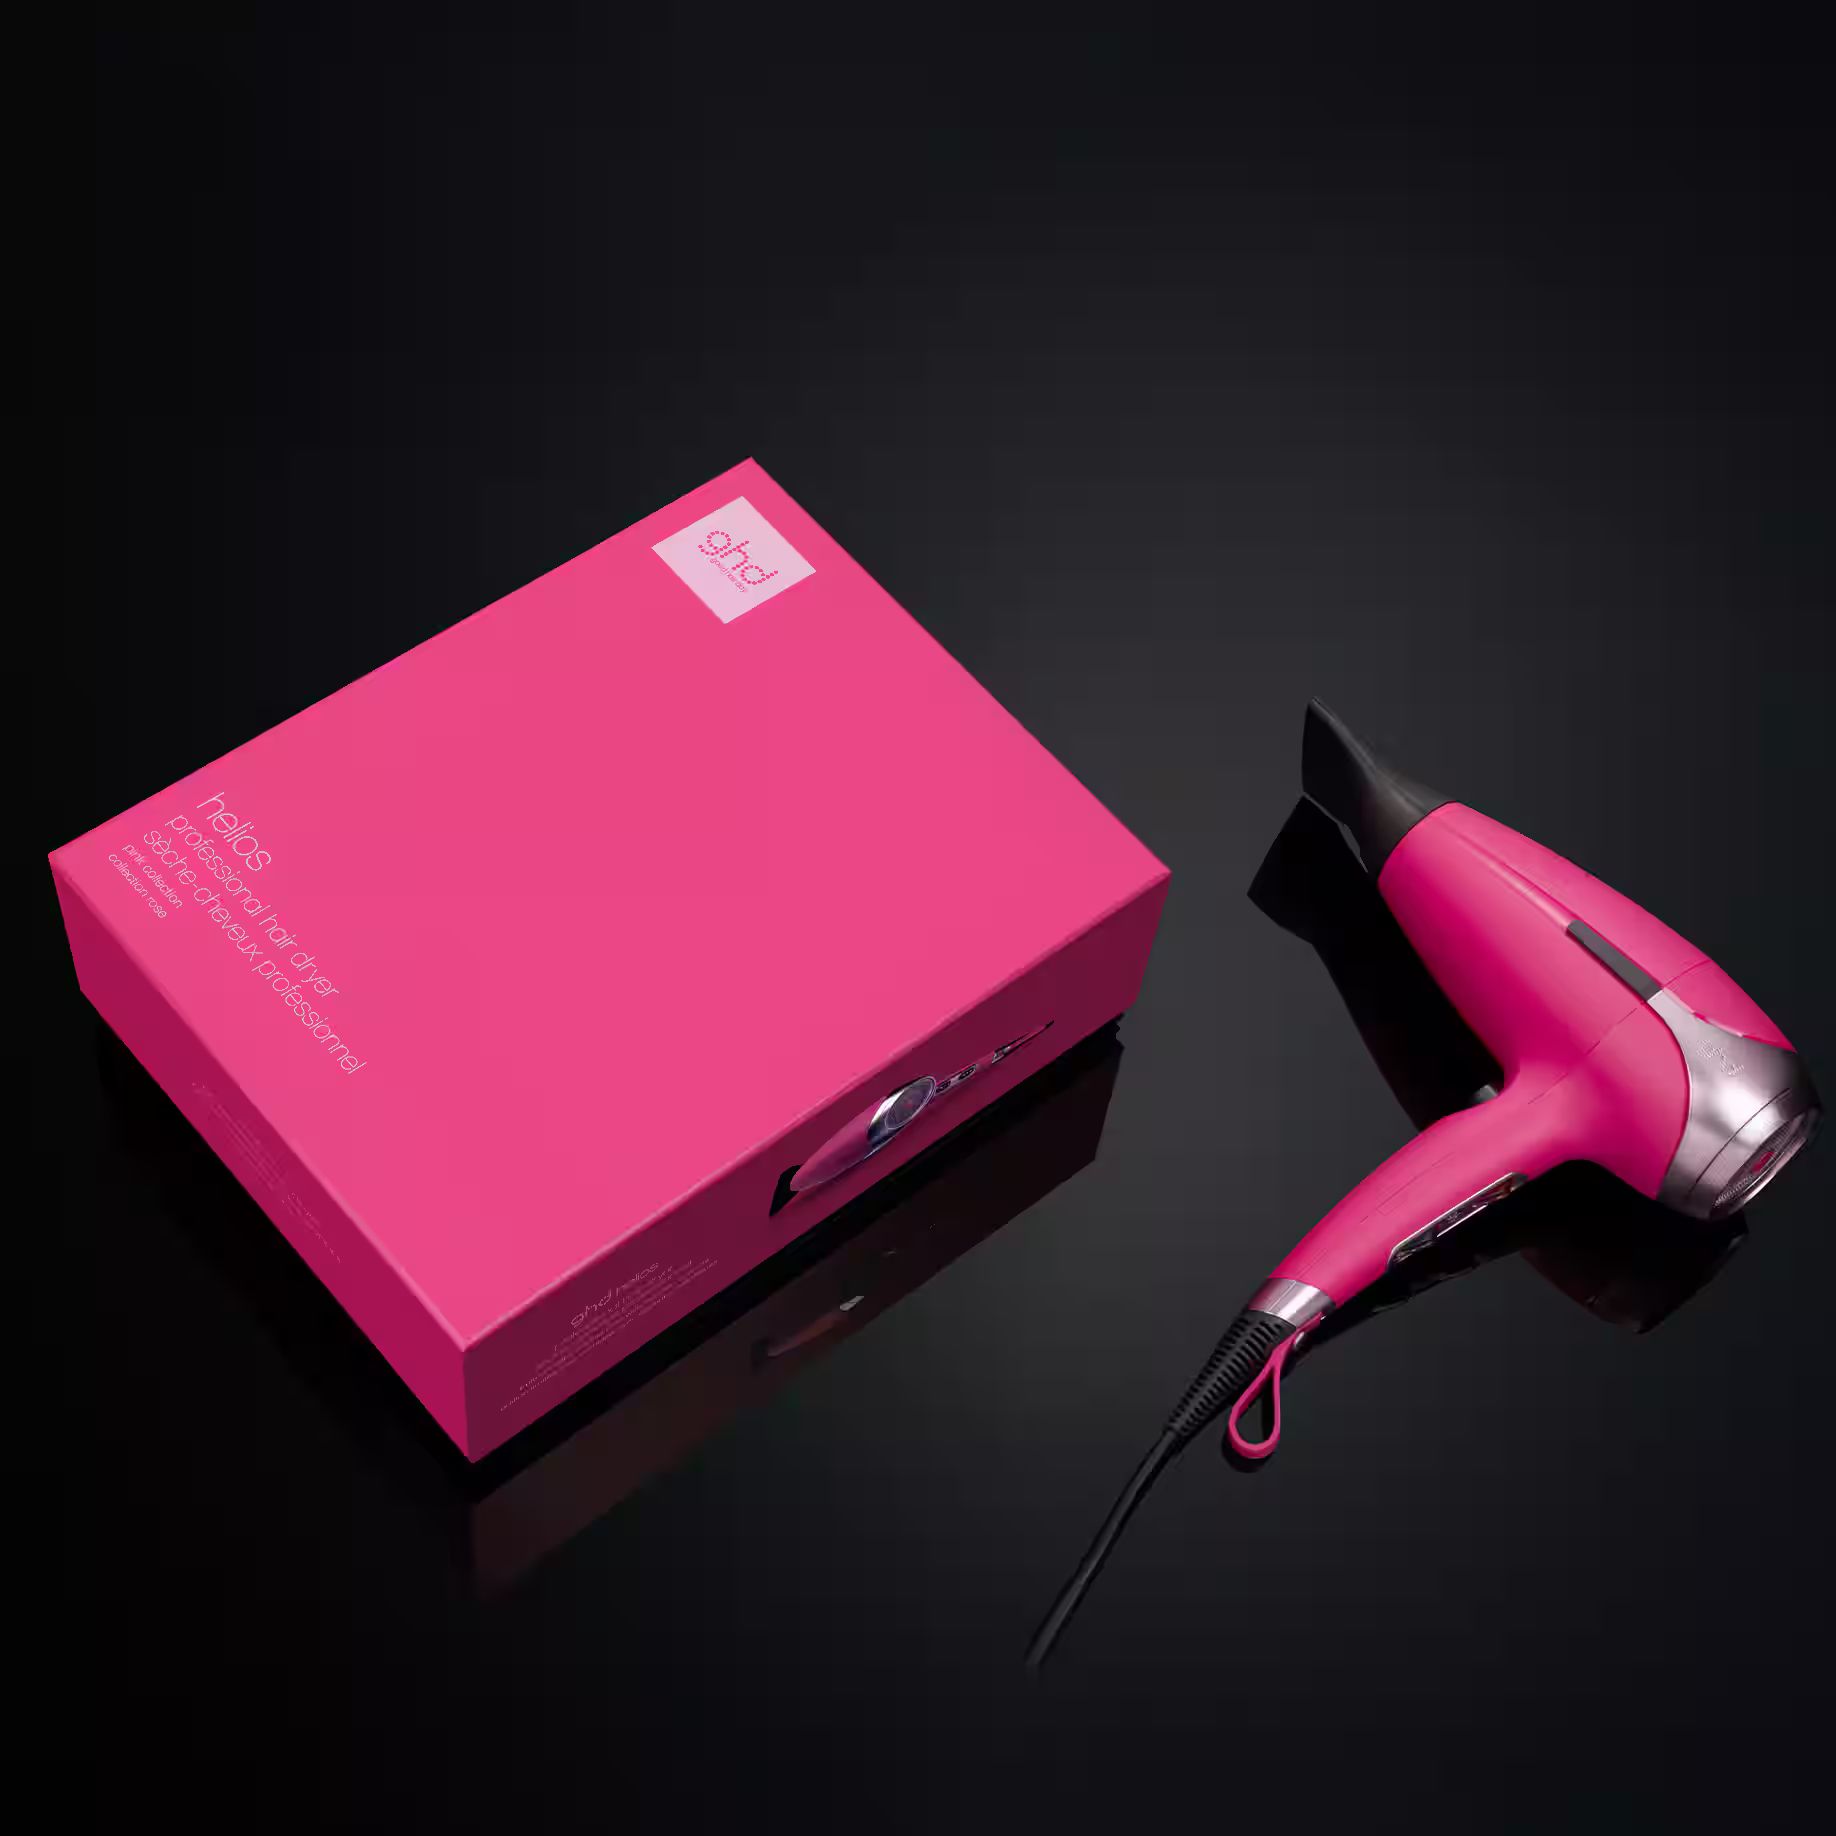 HELIOS 1875W ADVANCED PROFESSIONAL HAIR DRYER, LIMITED EDITION - ORCHID PINK | ghd (US)